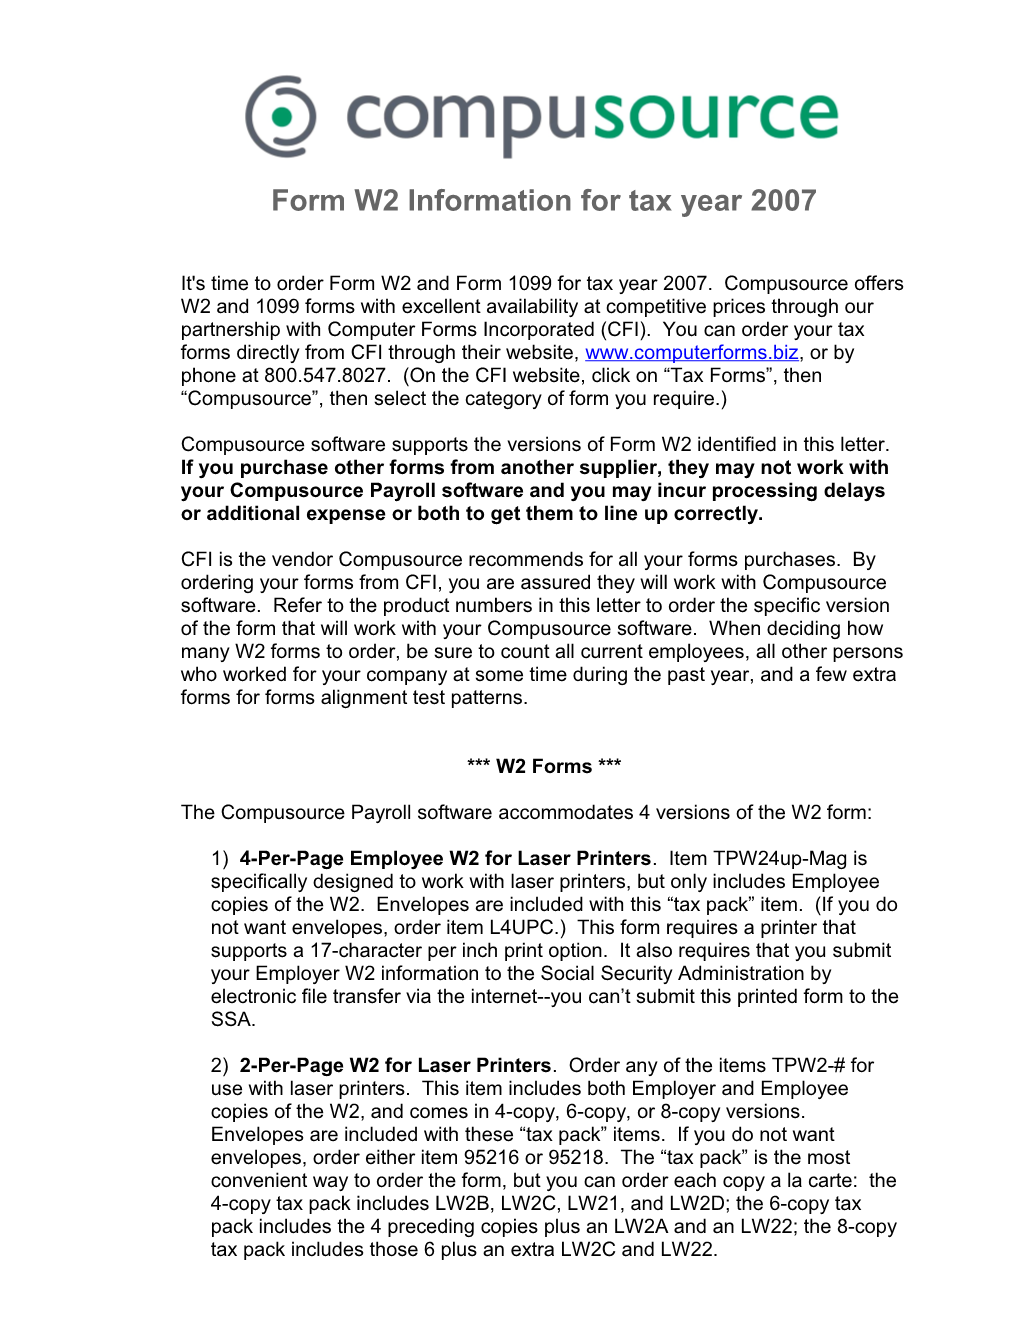 Form W2 Information for Tax Year 2007